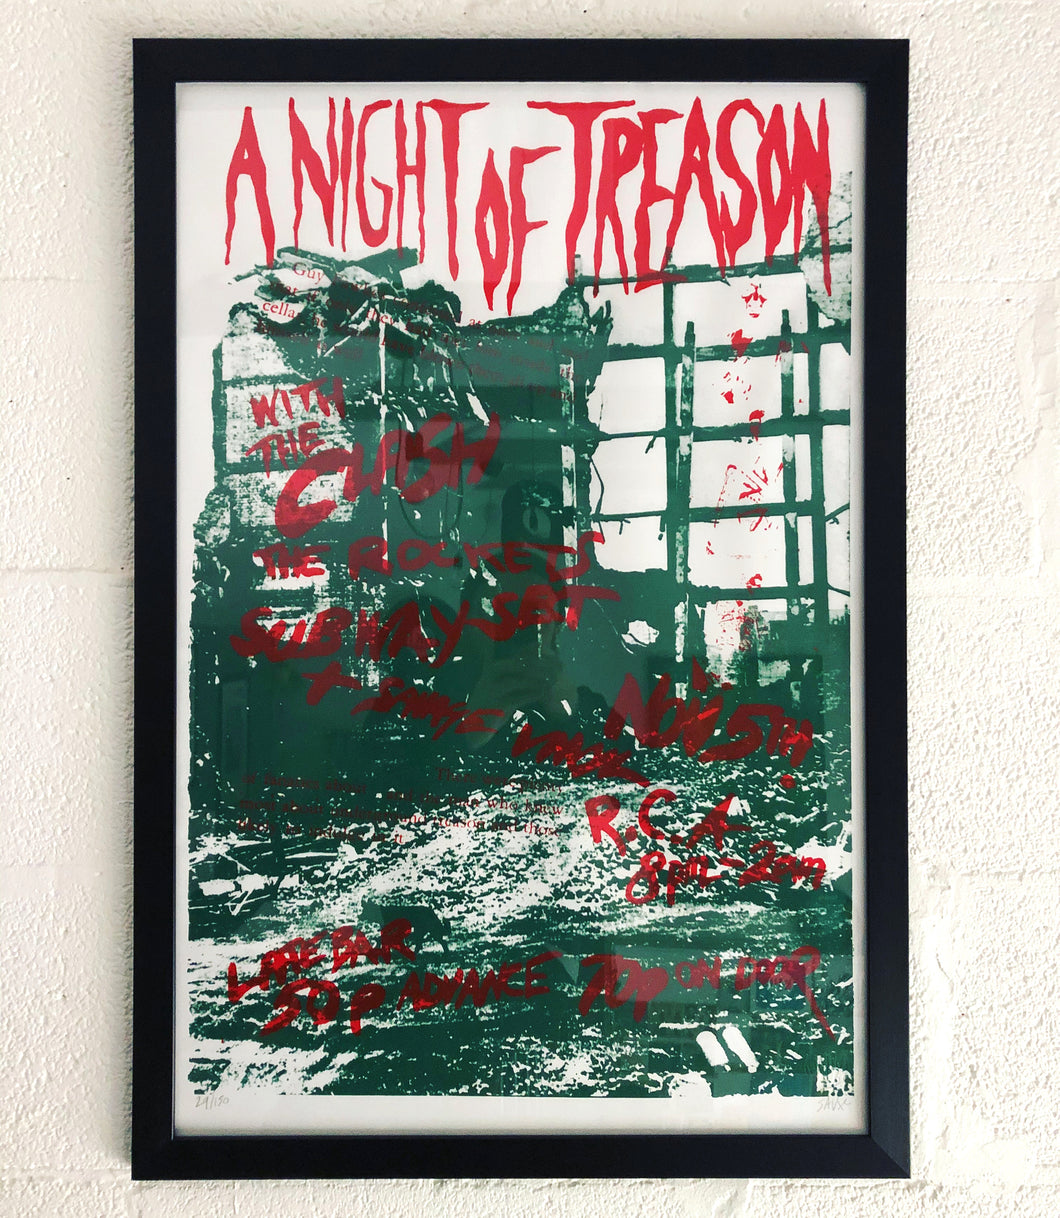 The Clash 'Night of Treason' Limited Edition Signed & Numbered Screen Print